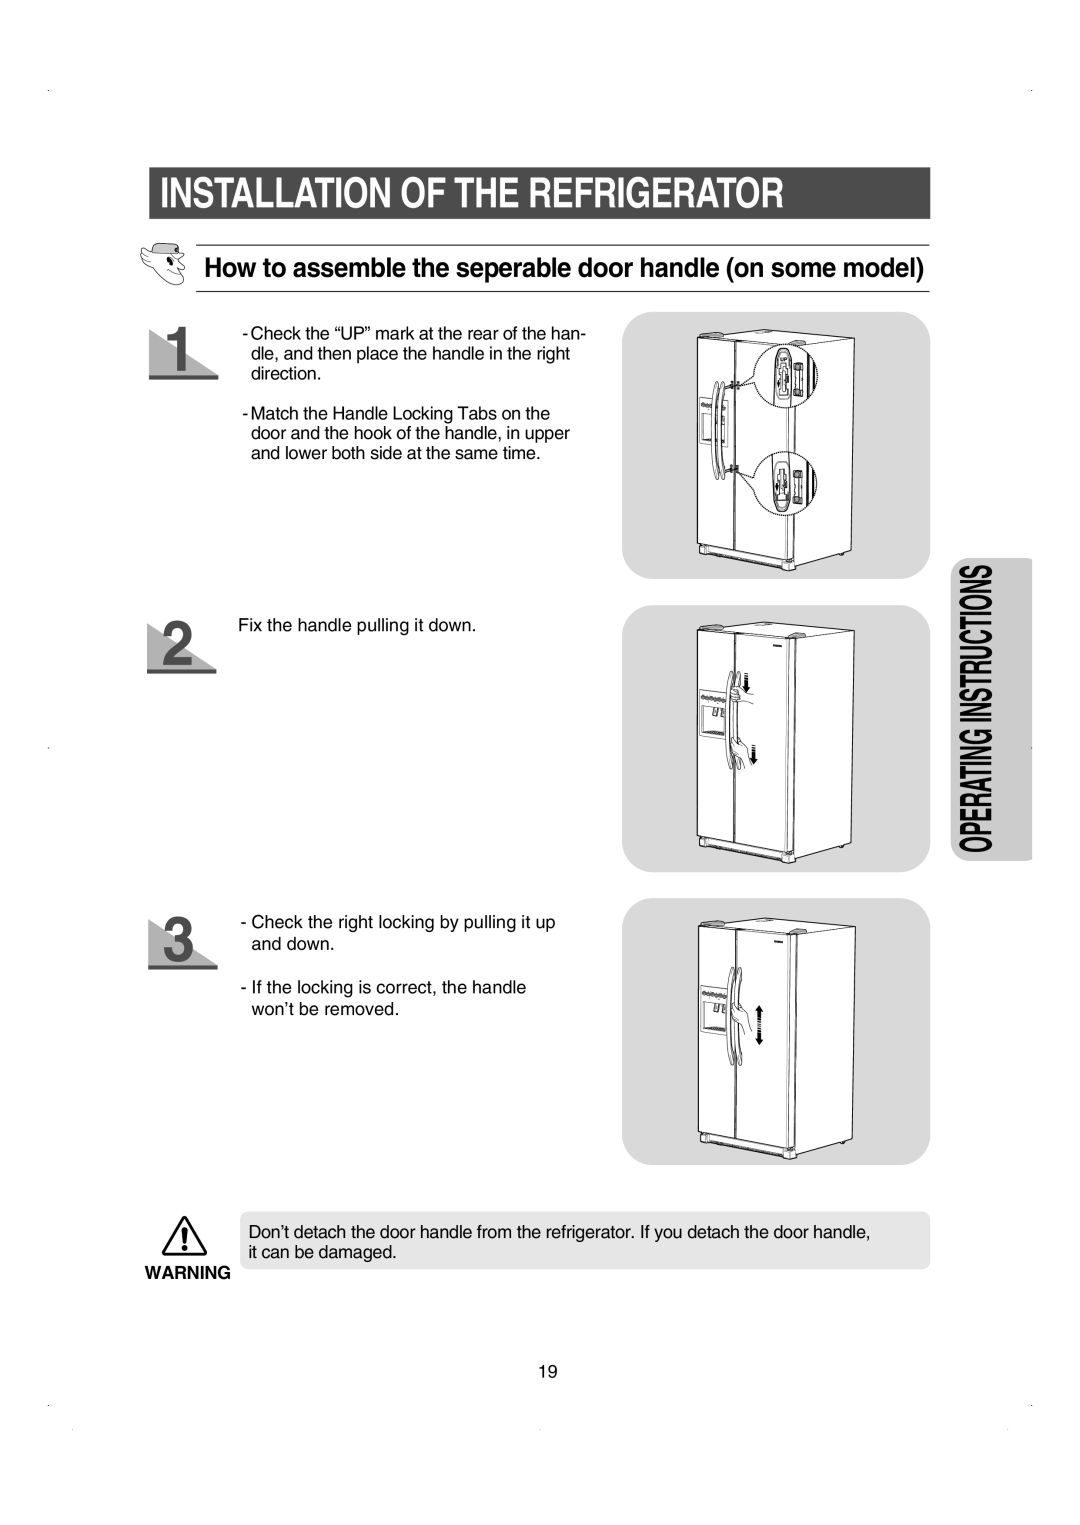 Samsung RS26WUNS Installation Of The Refrigerator, How to assemble the seperable door handle on some model 